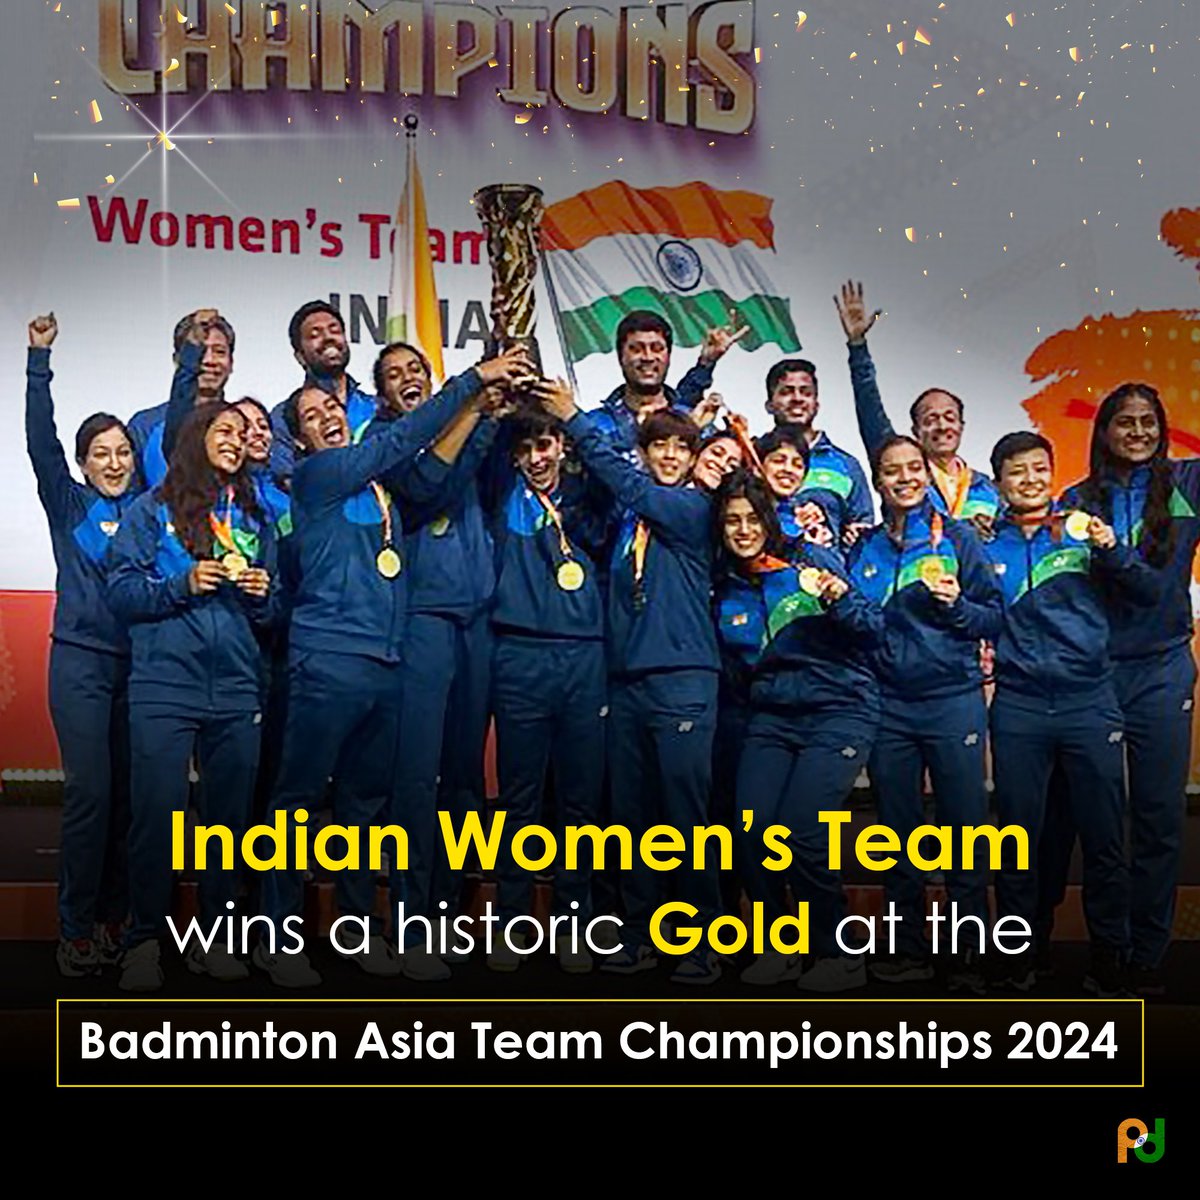 Scripting history in gold 🥇!

The women's team of #BemisaalBharat won a historic gold medal at the Badminton Asia Team Championships 2024 held in Malaysia.

This is 🇮🇳's first-ever gold medal at the championships!